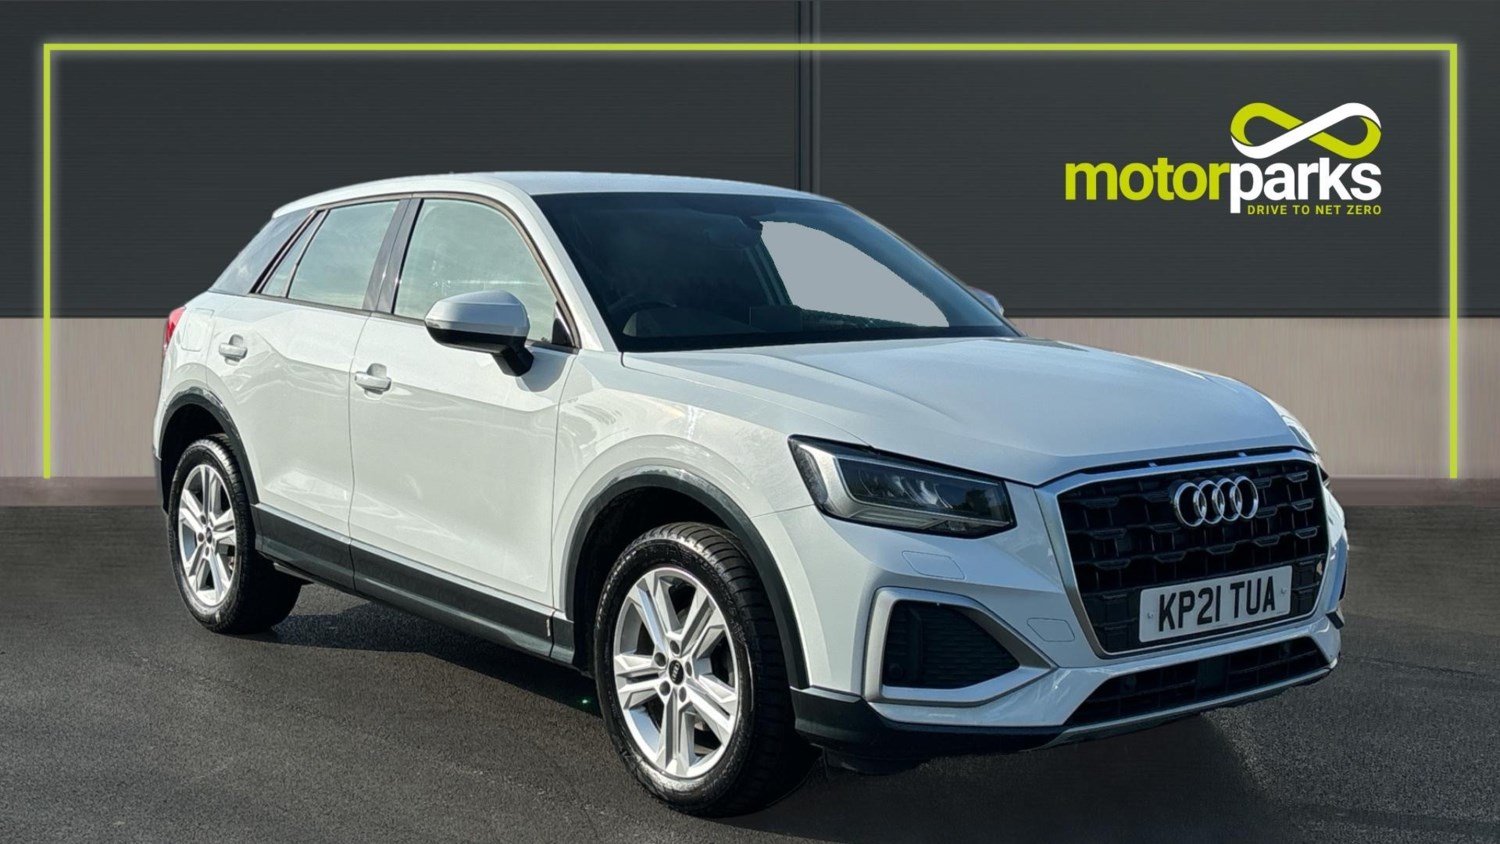 2021 used Audi Q2 30 TFSI Sport 5dr - MMI Navigation with MMI Touch